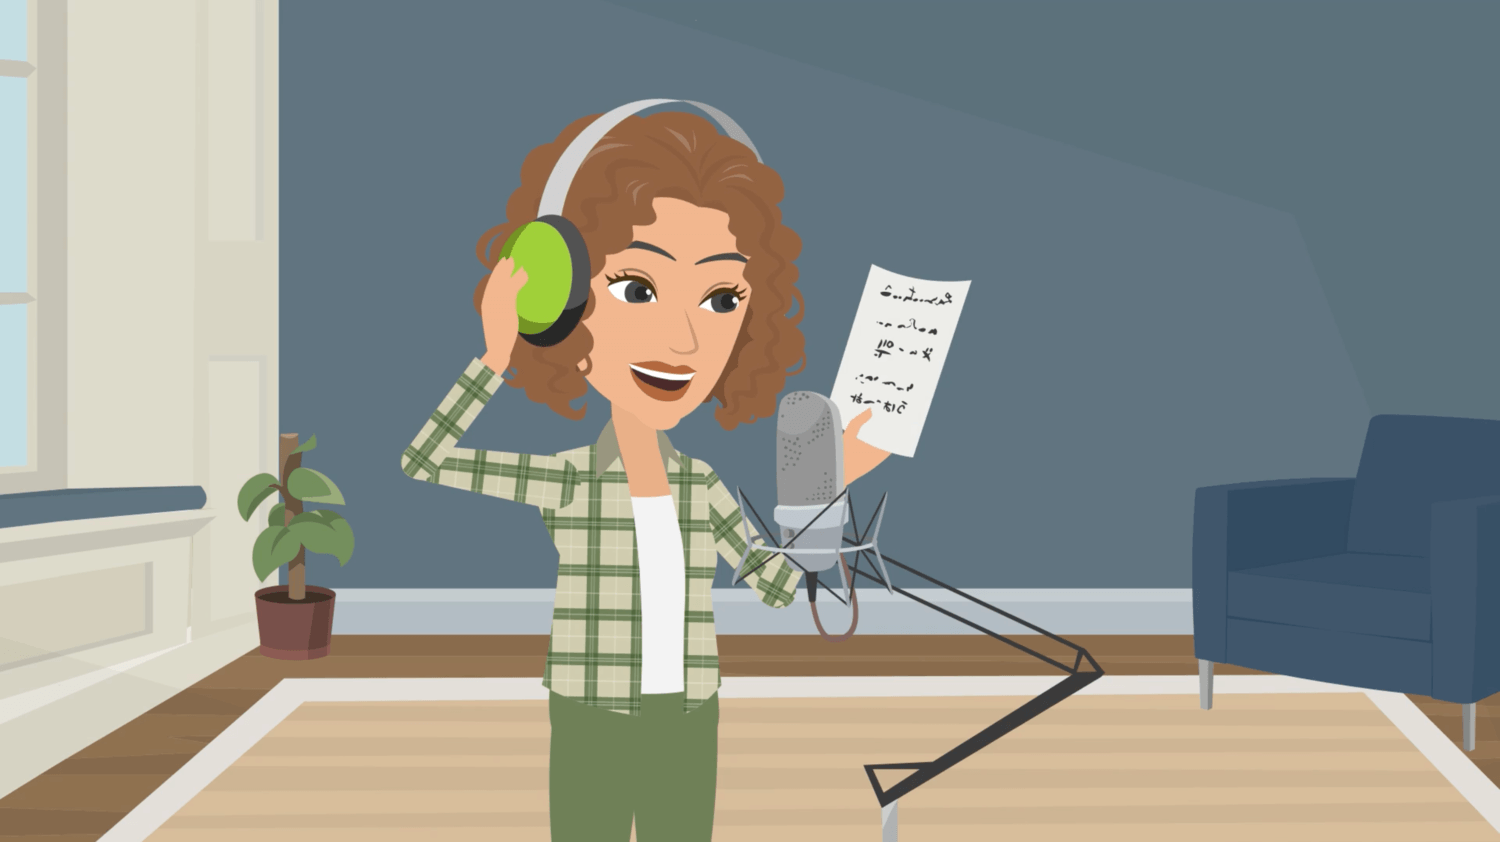 Animated woman looking at a script and speaking into a professional microphone.